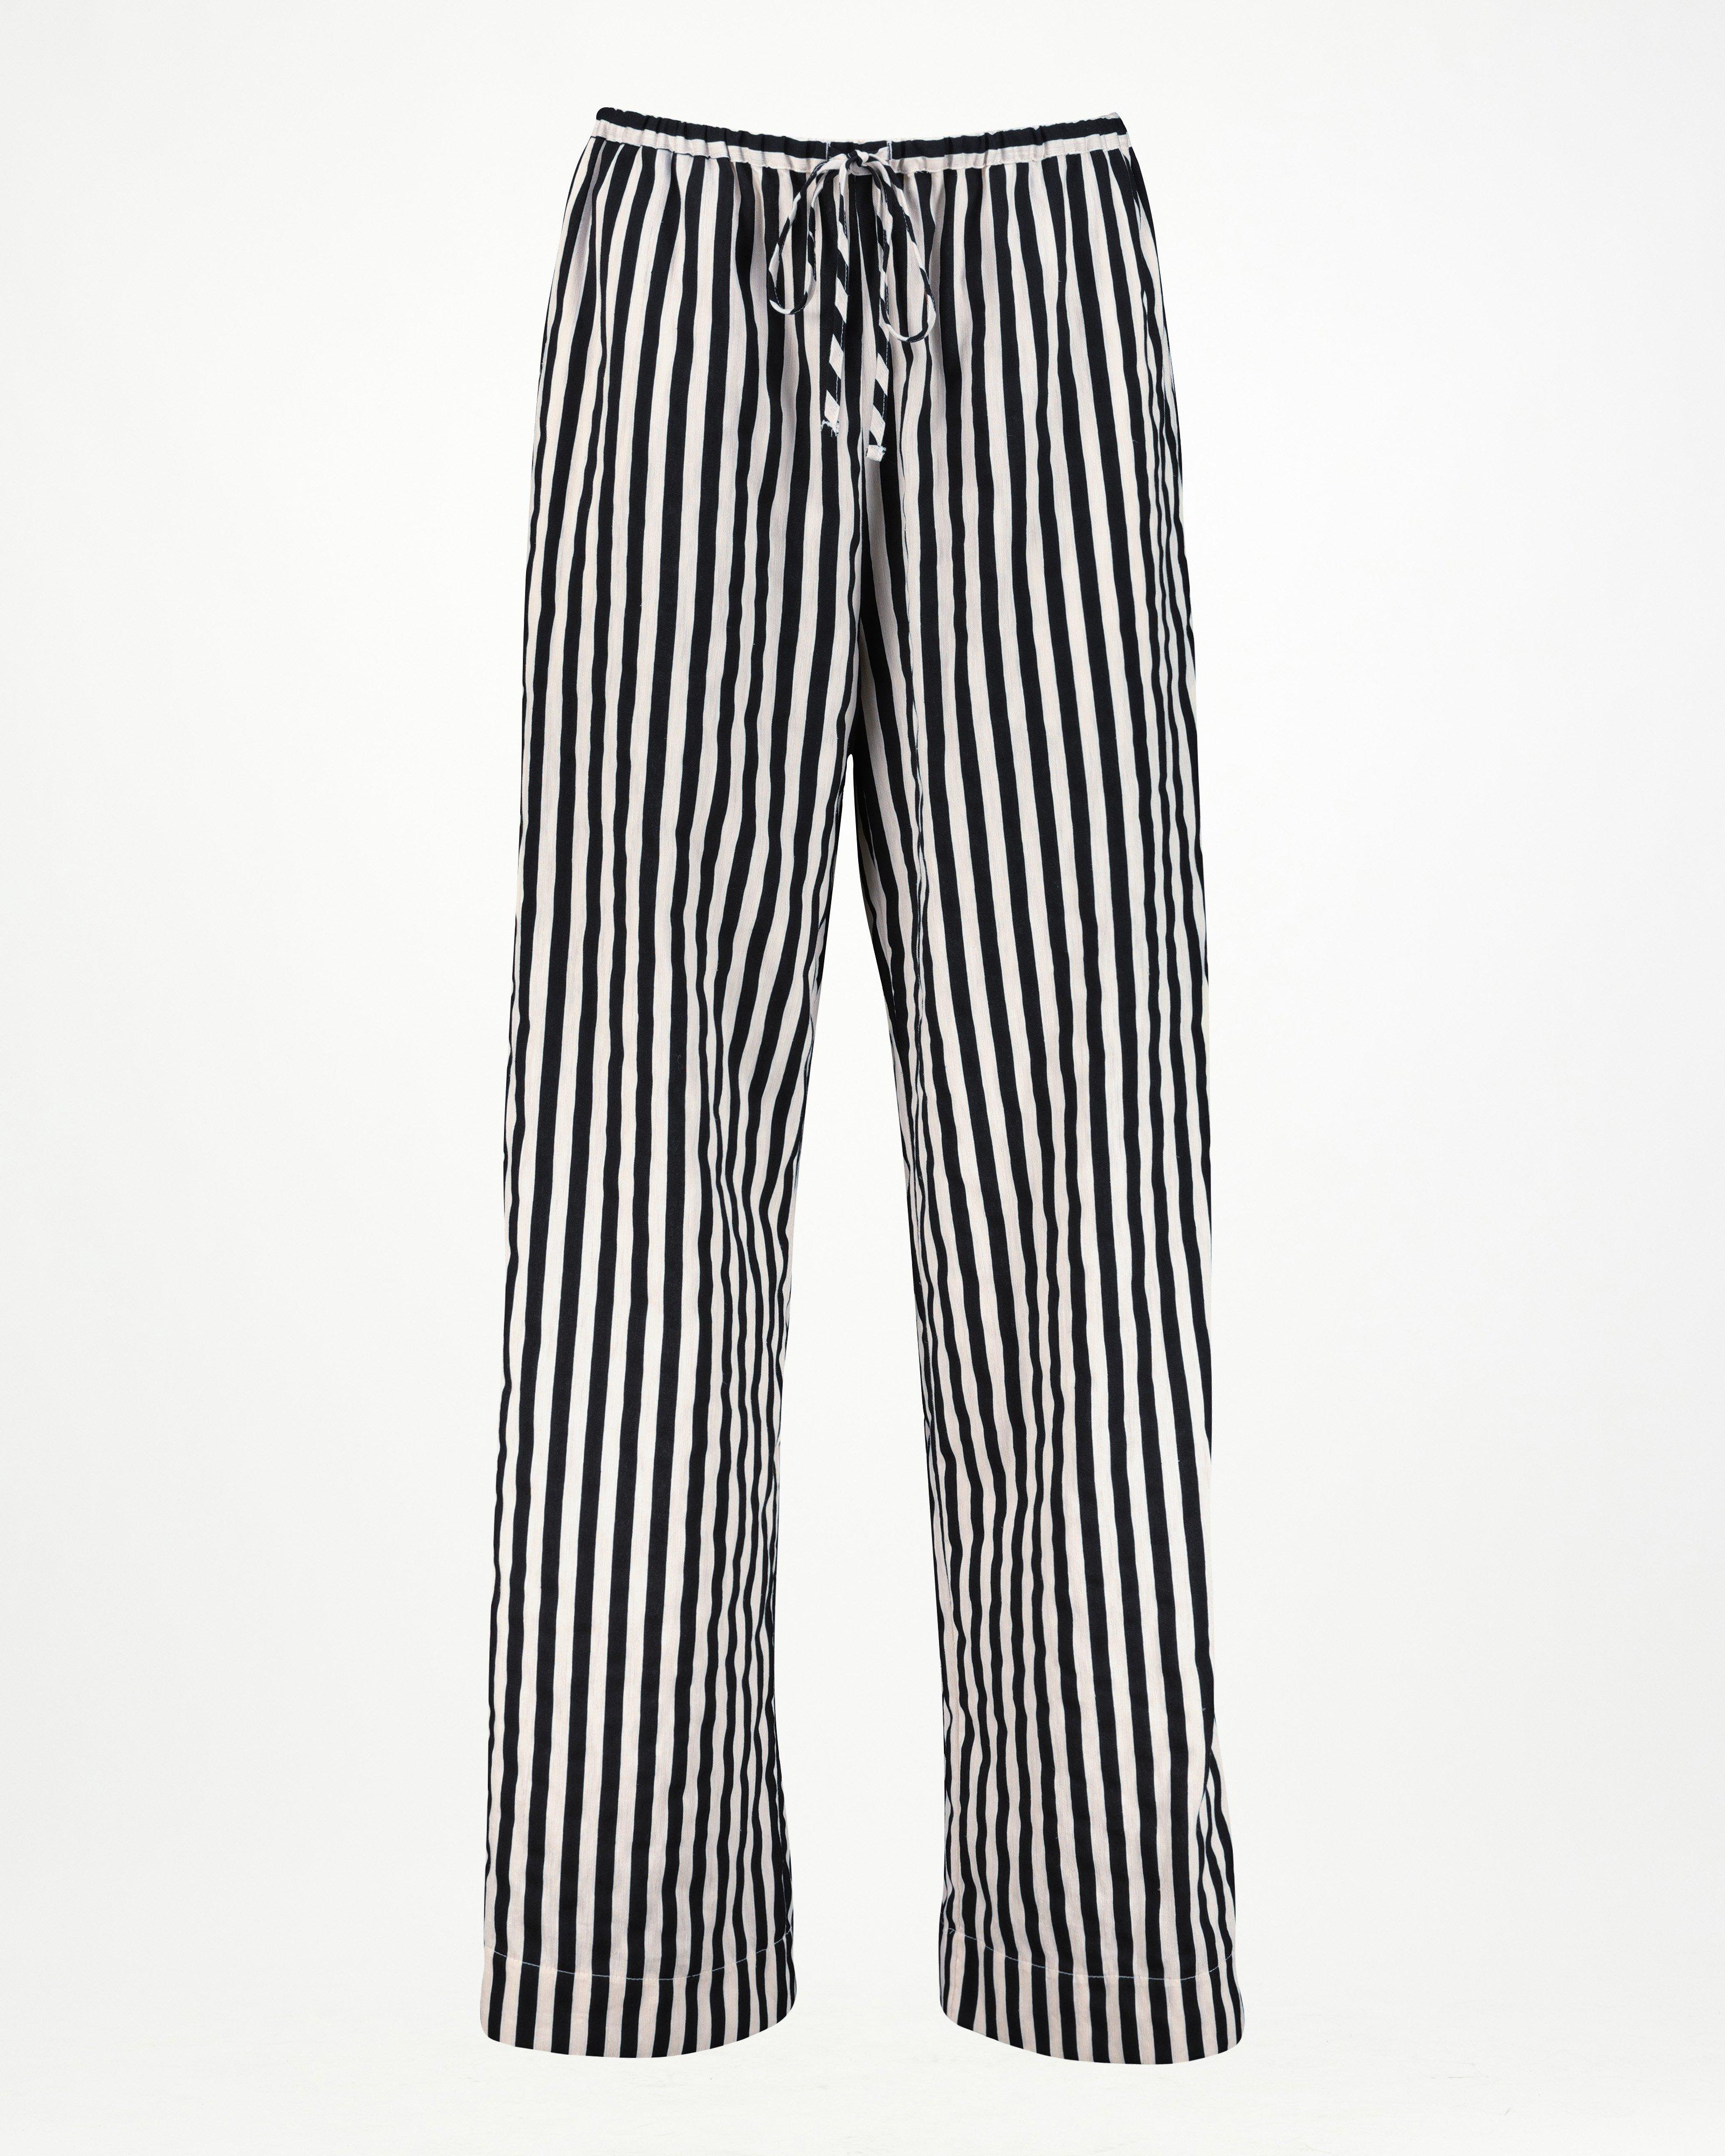 Orchid Black and White Stripe Pant -  Black